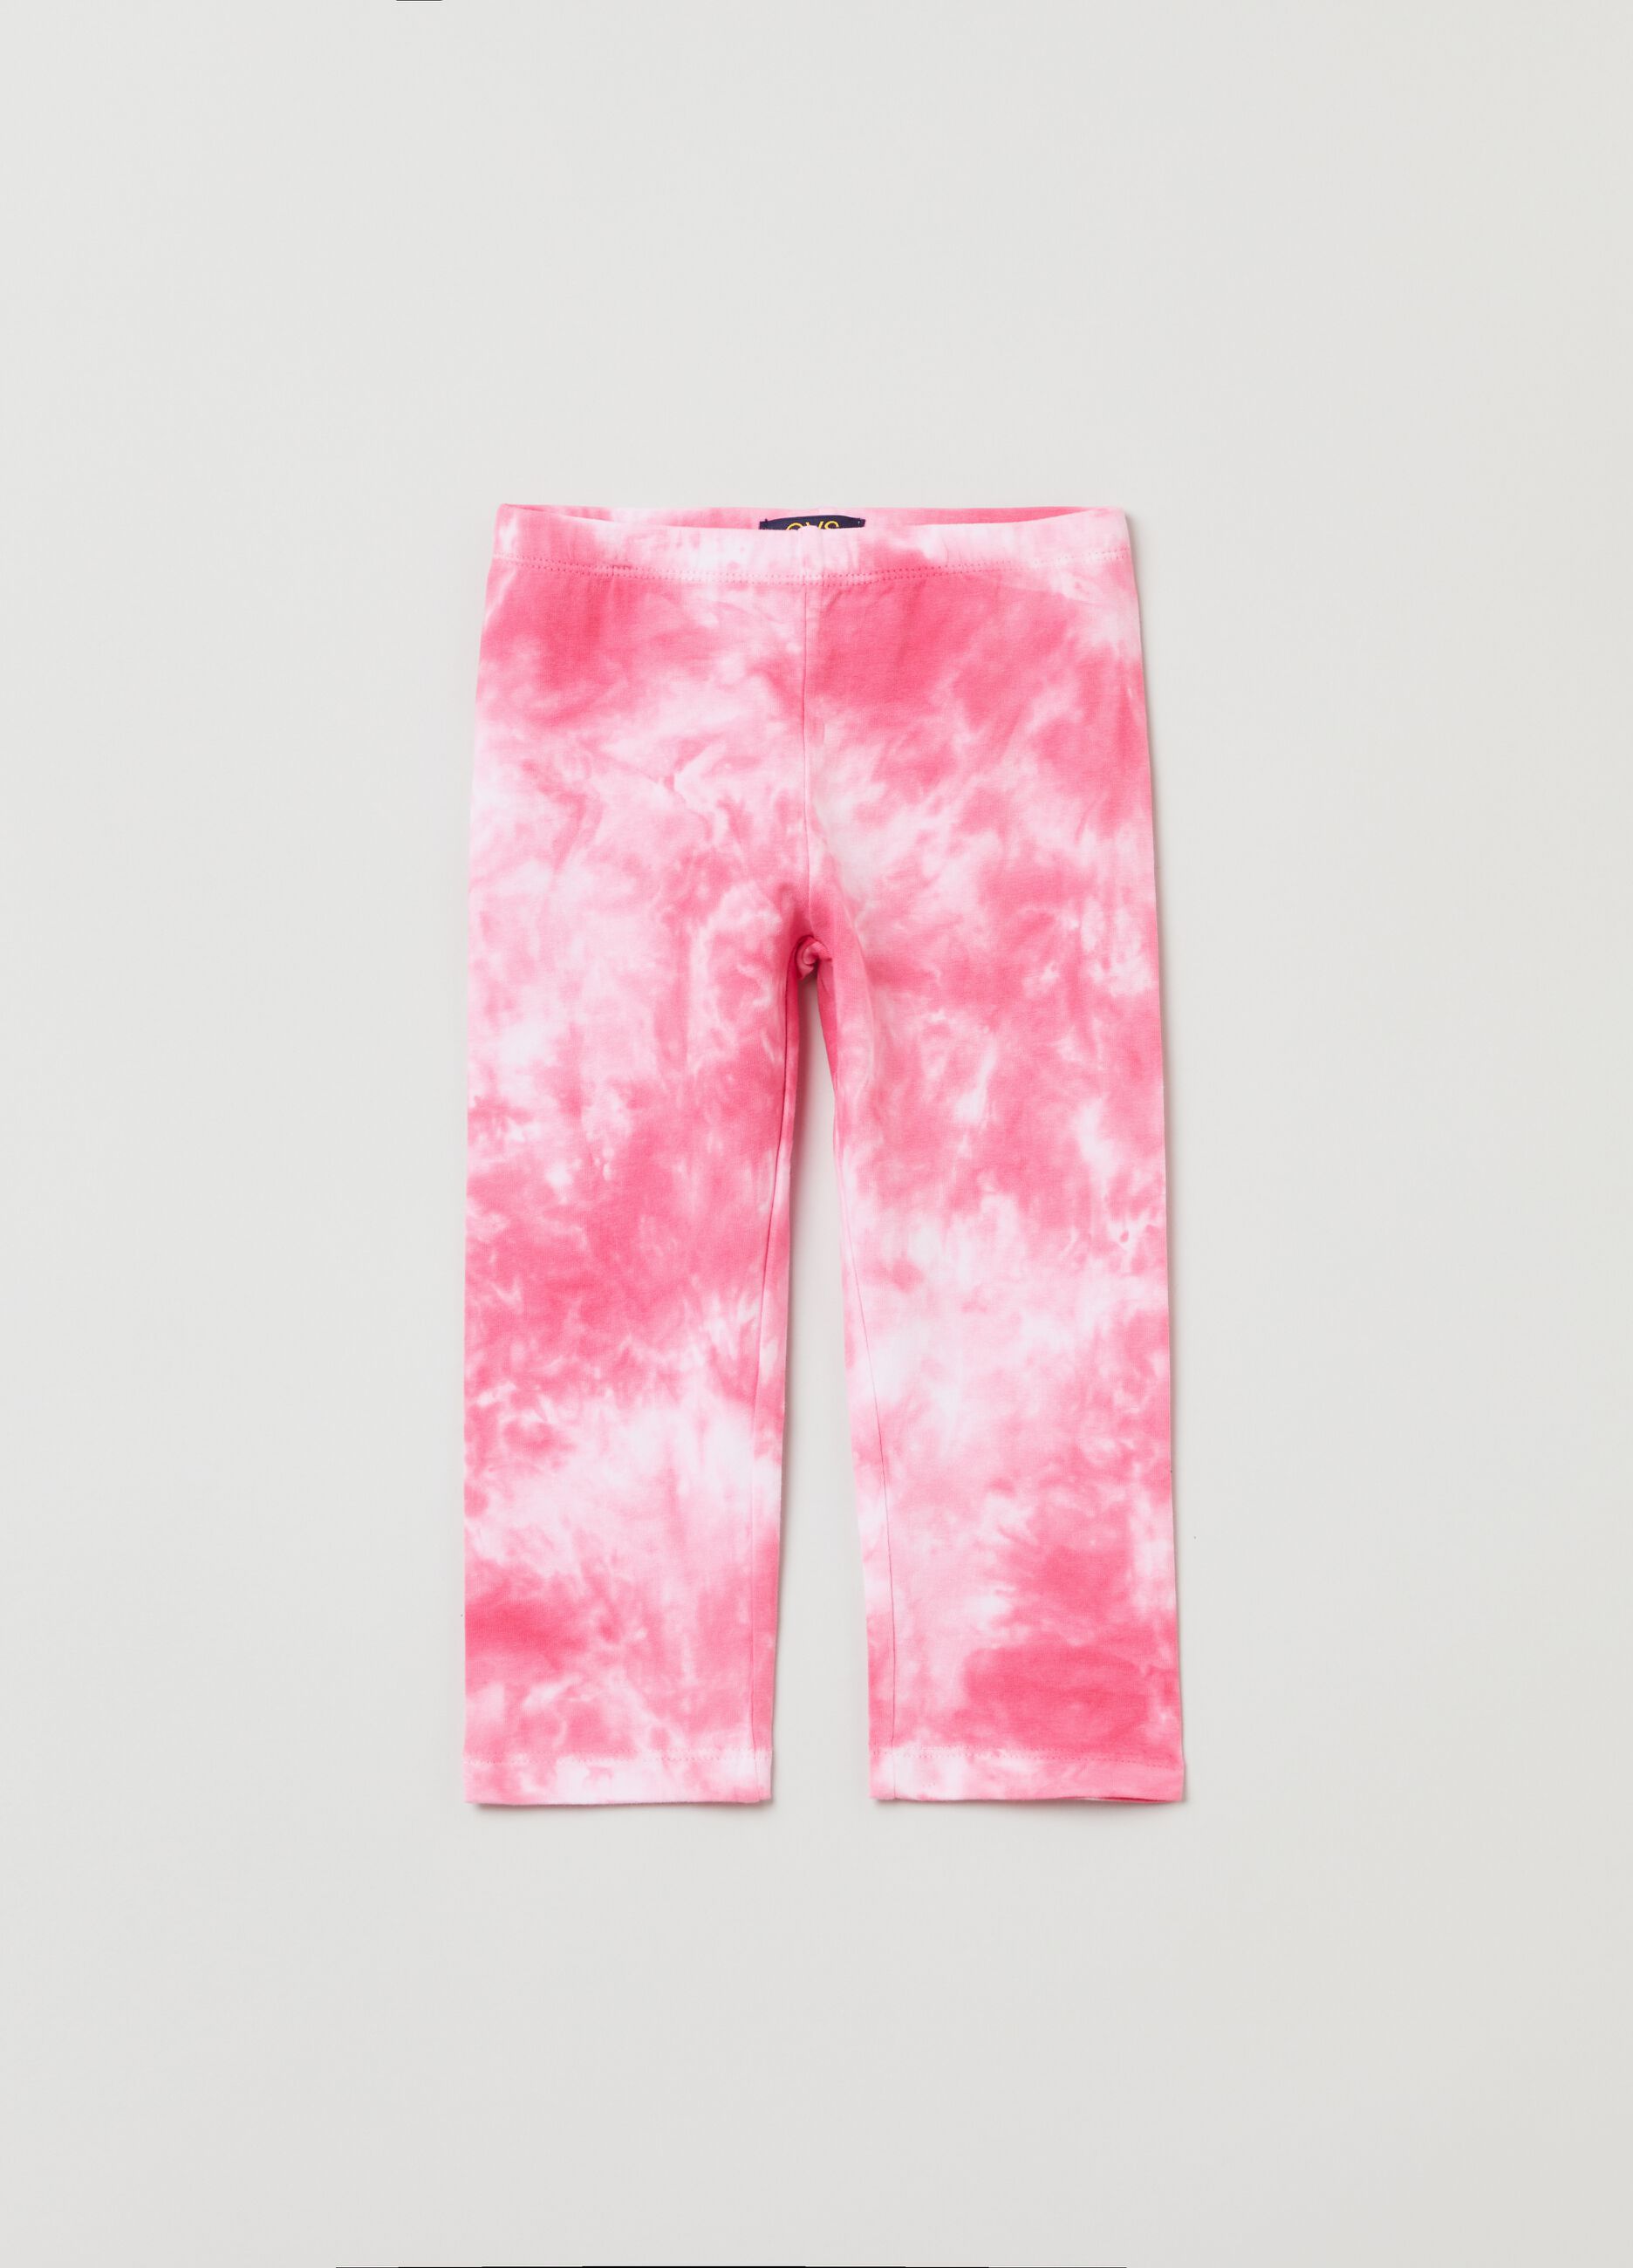 Leggings in stretch cotton with tie dye pattern